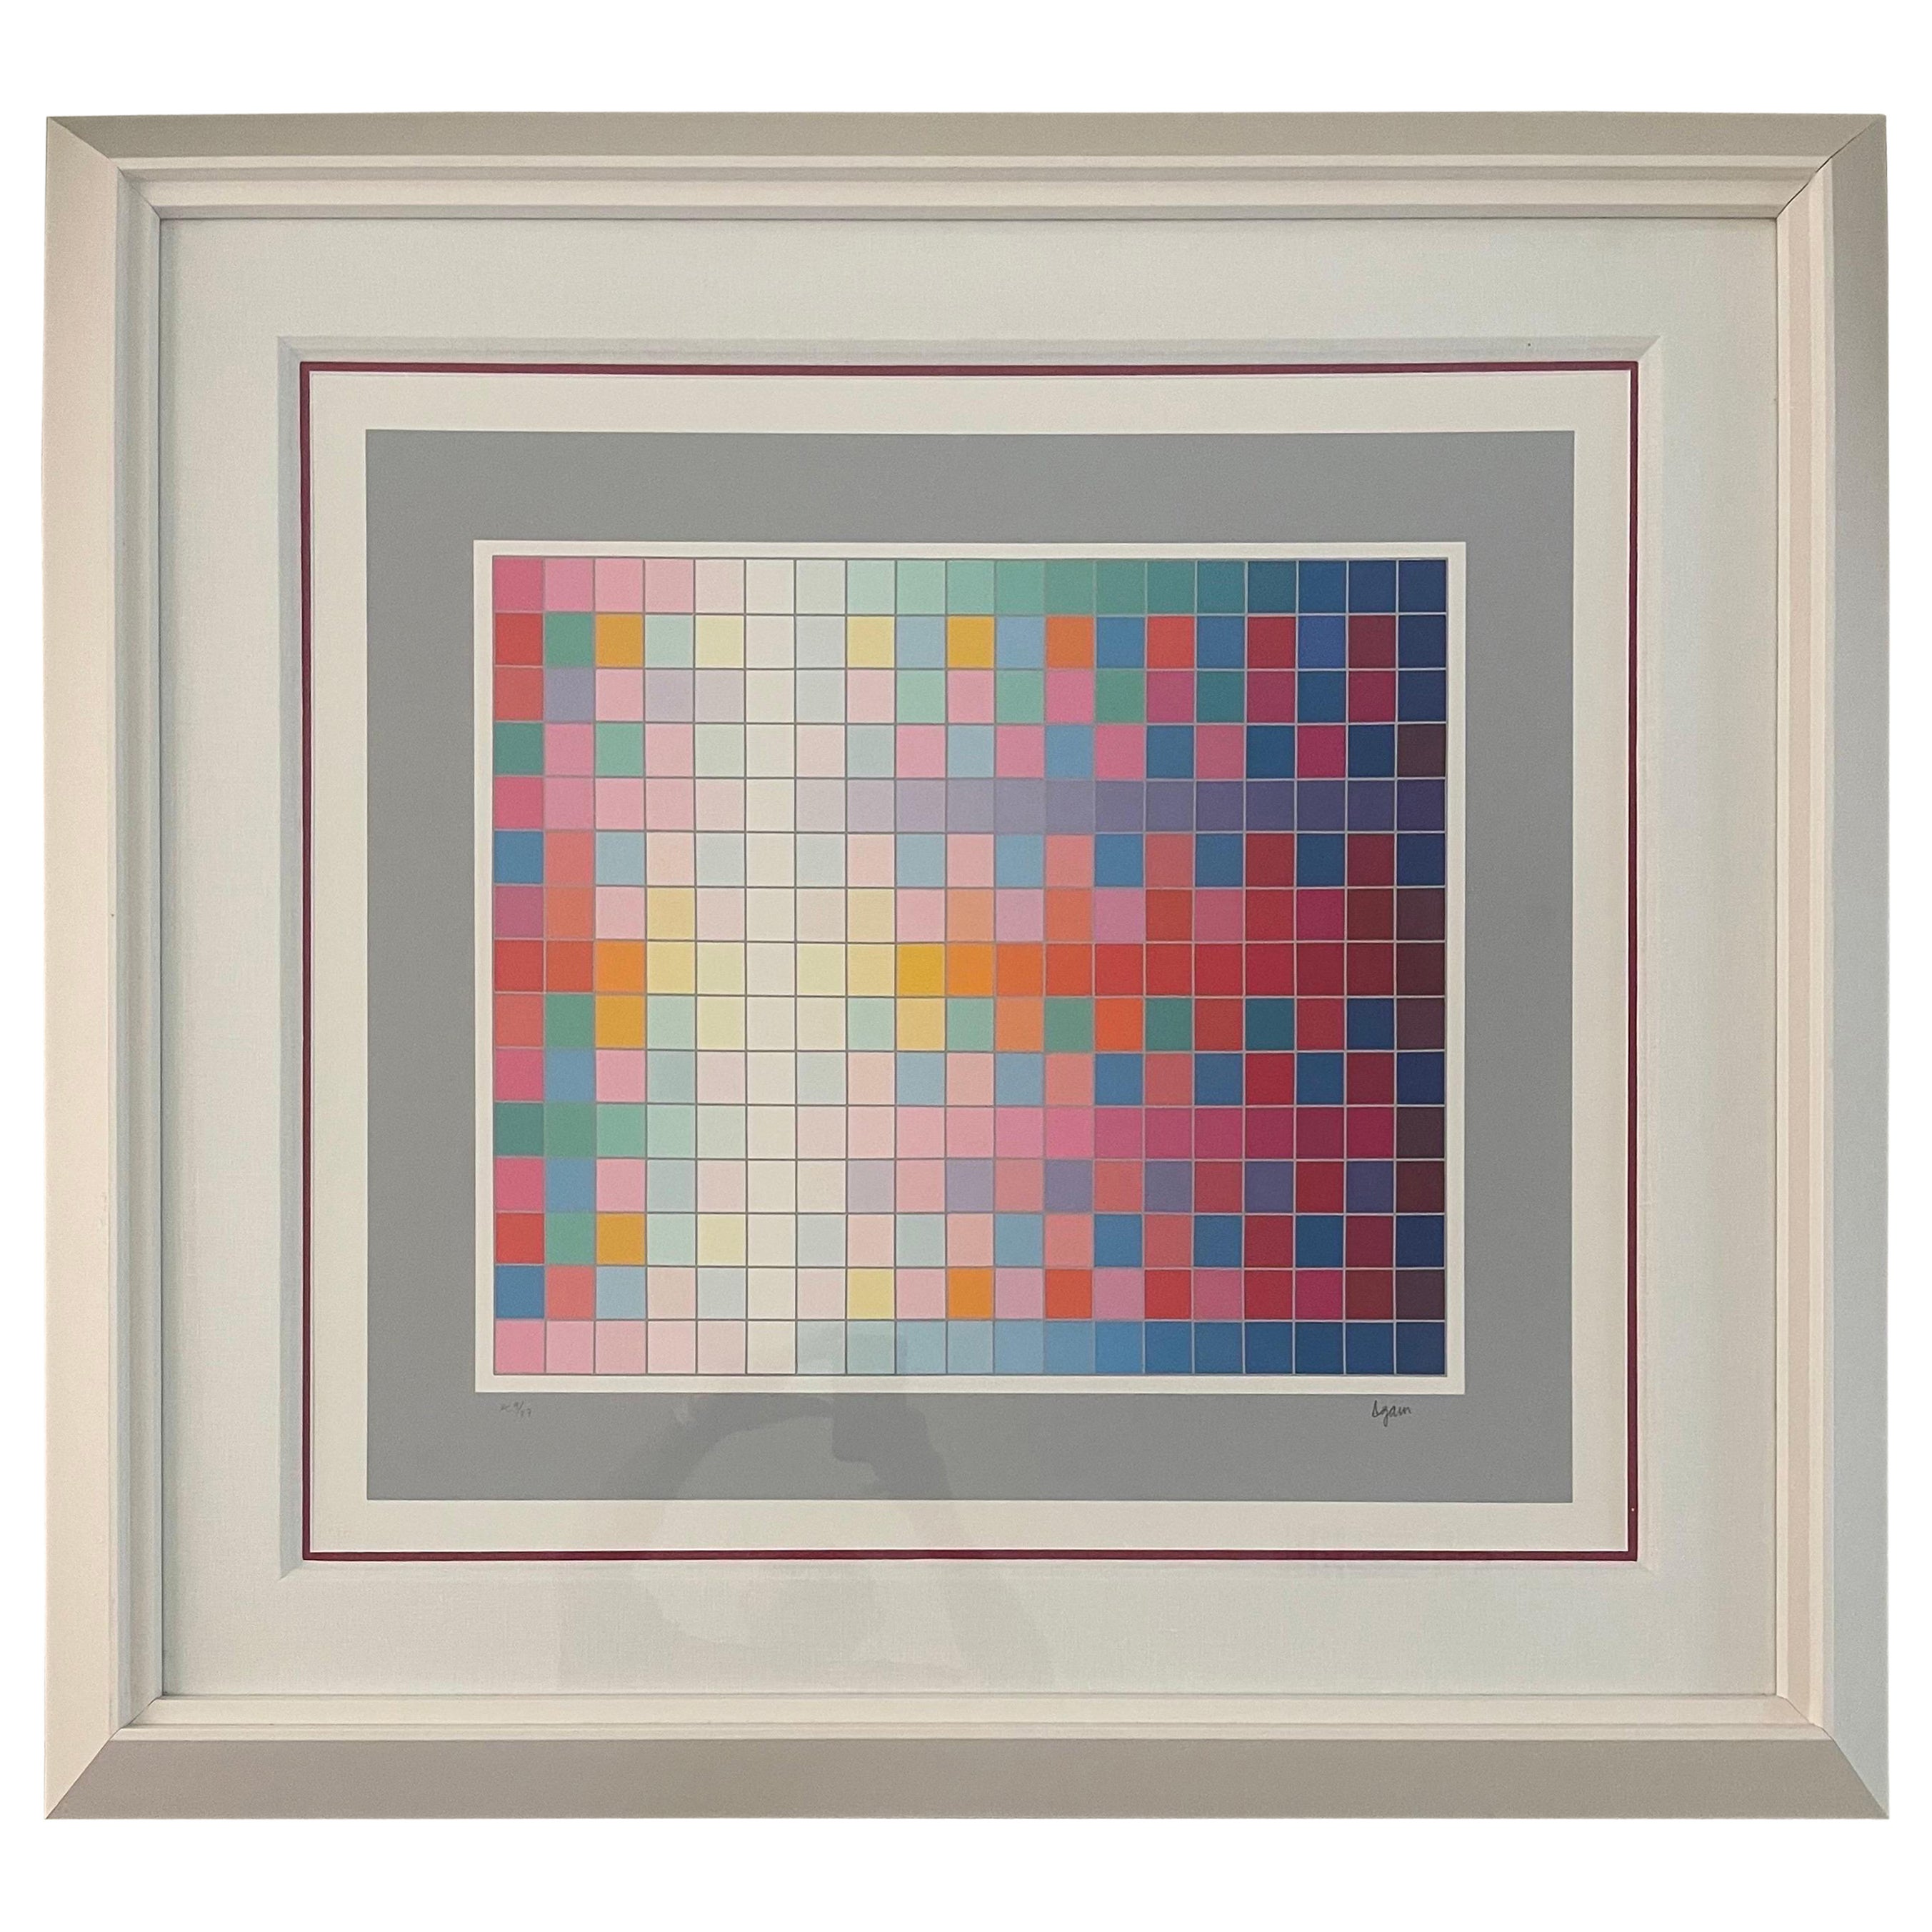 Signed Post-Modern Geometric Serigraph  Entitled "New Landscape" by Yaacov Agam For Sale